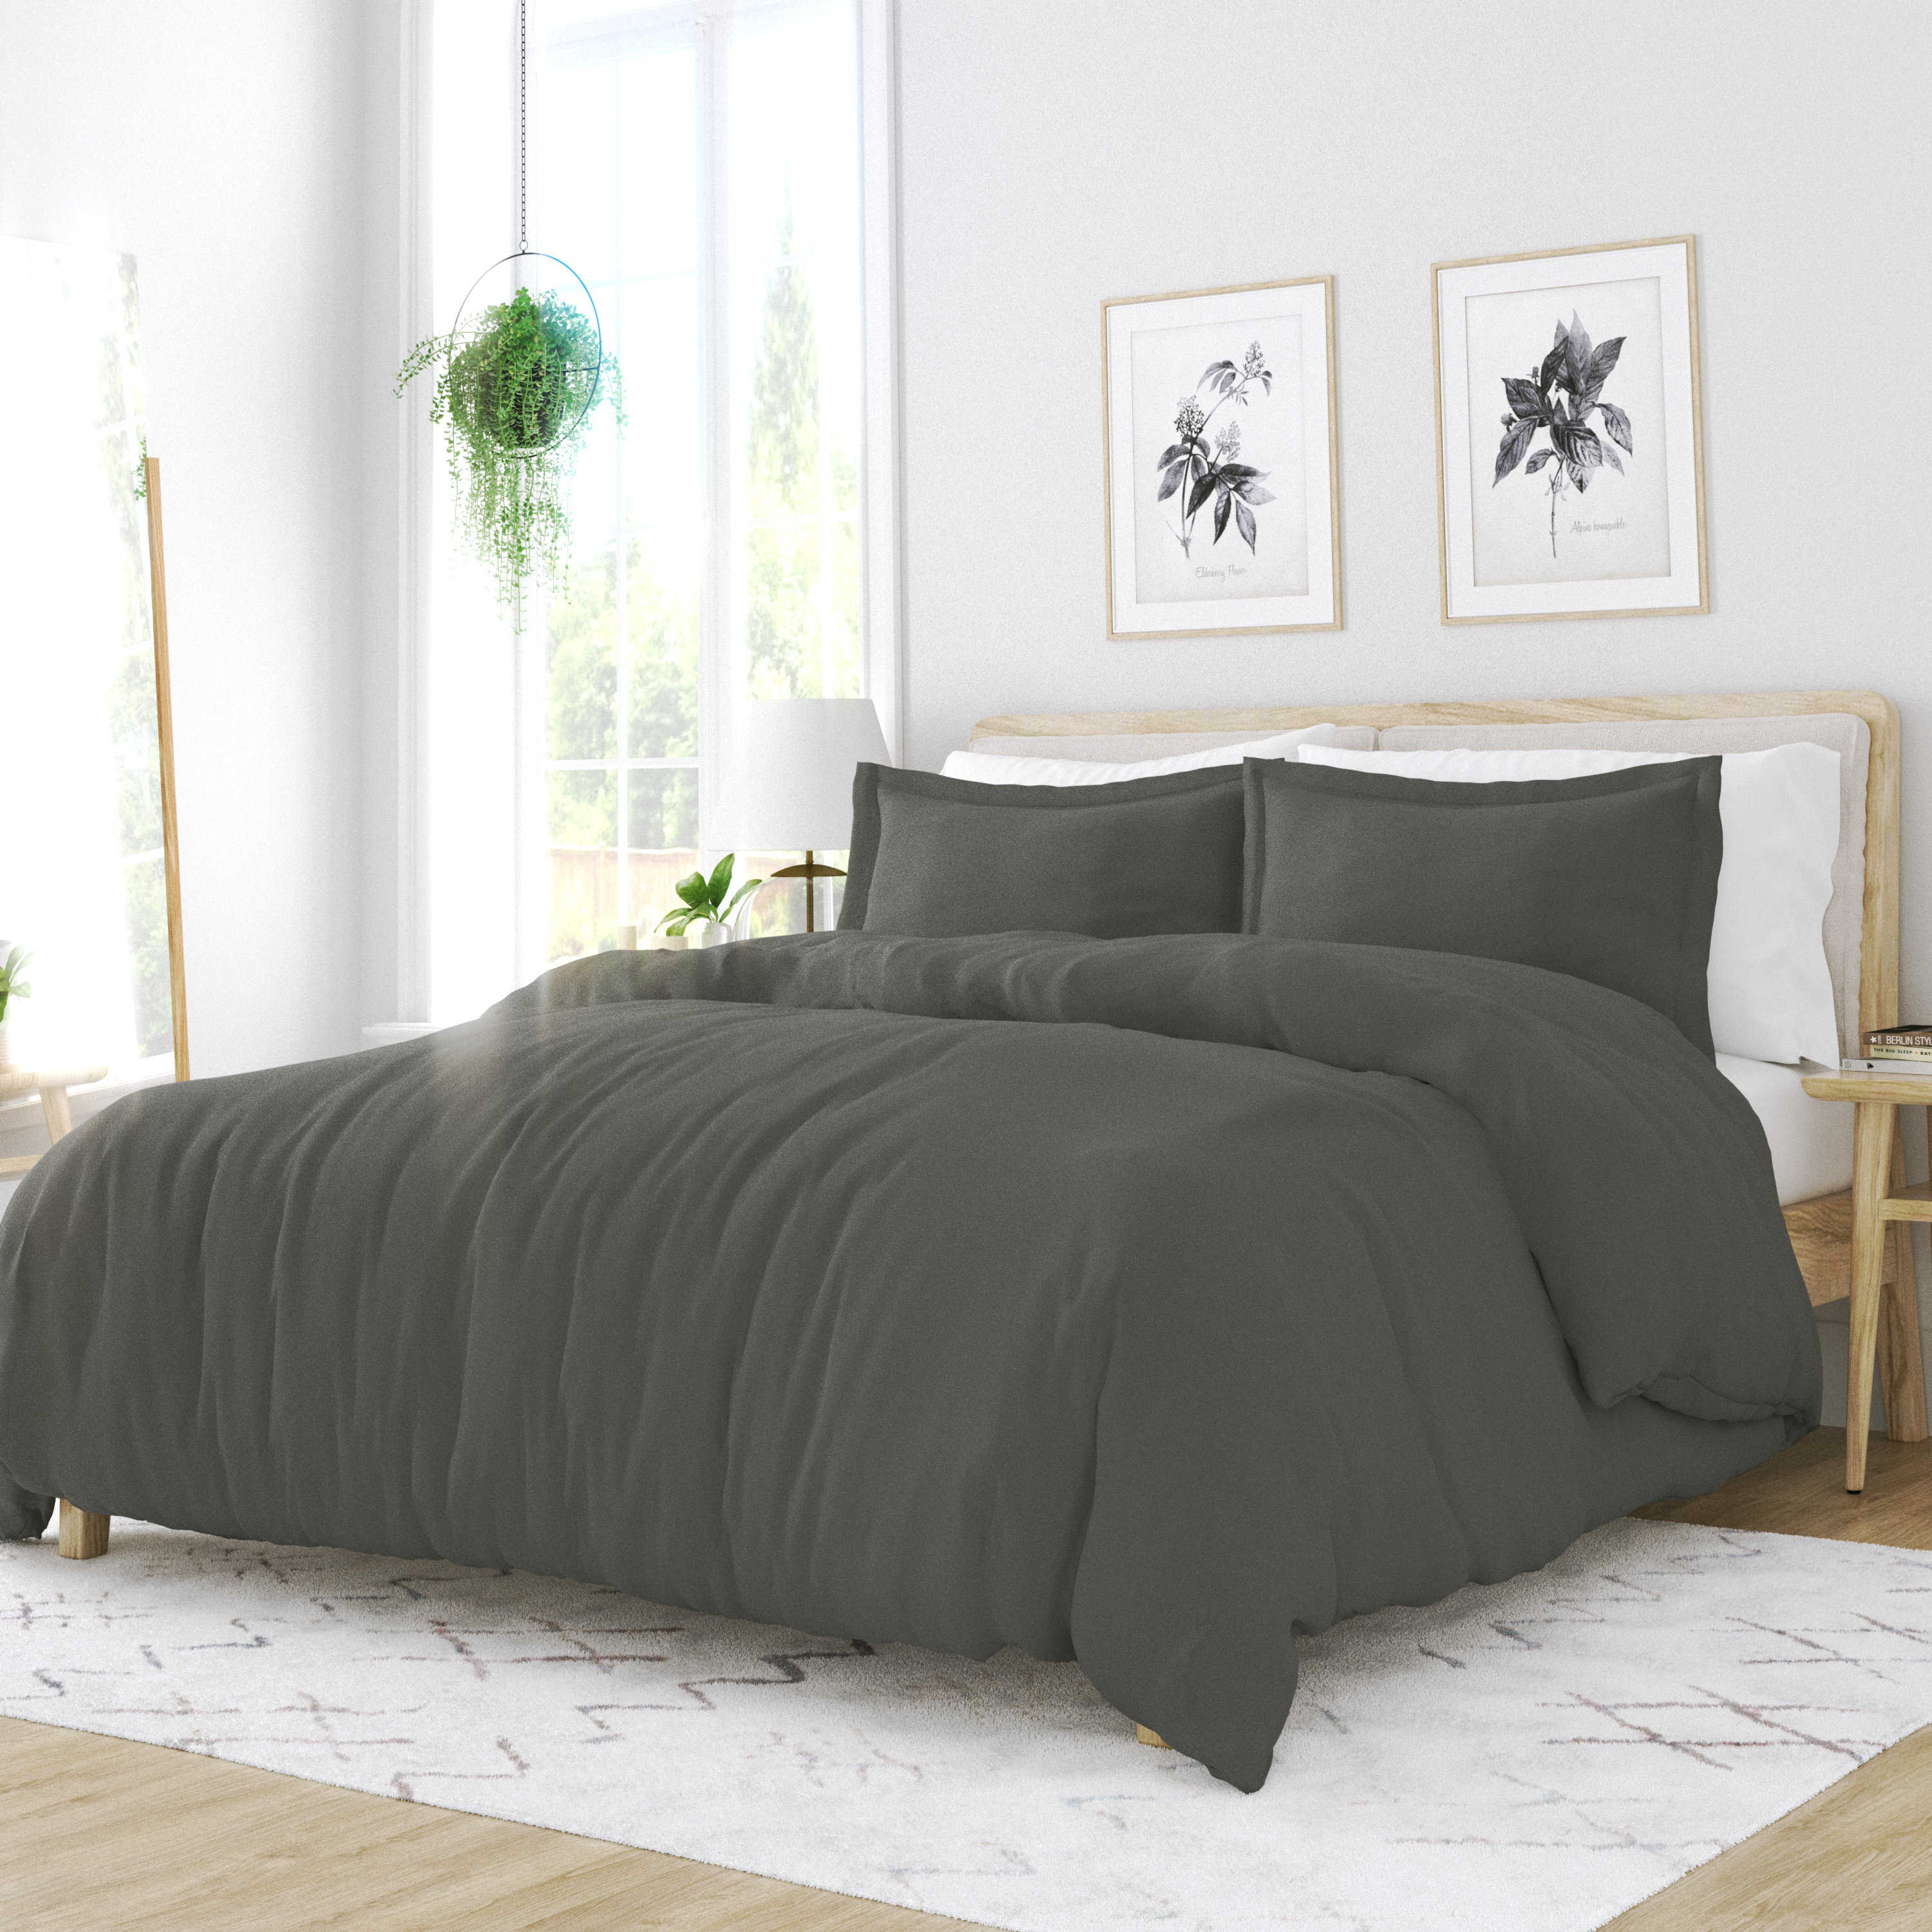 Corner Keepers Duvet Cover Snaps - Holds Your Comforter in Place All Night,  No More Shifting, Easy Iron-On Install, Strong Simple Solution, Less Bulky